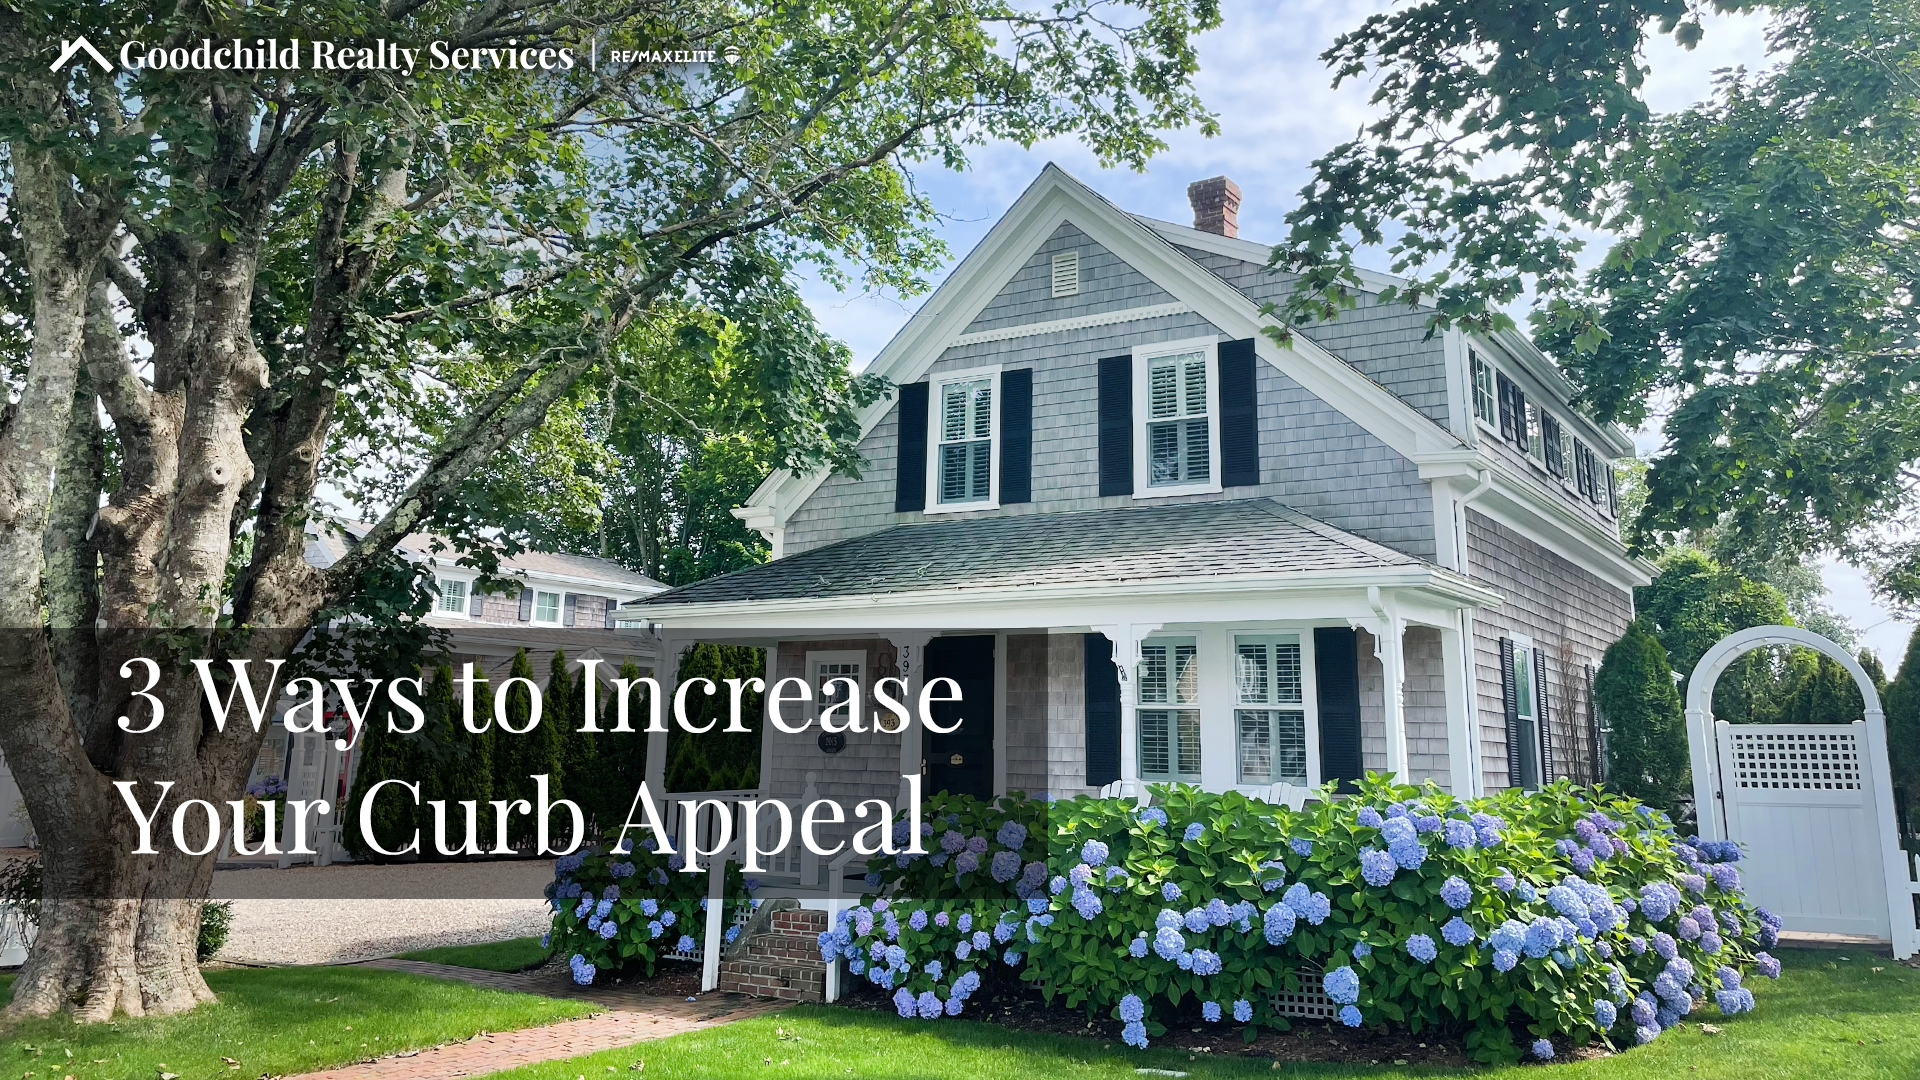 3 Ways to Increase Your Curb Appeal